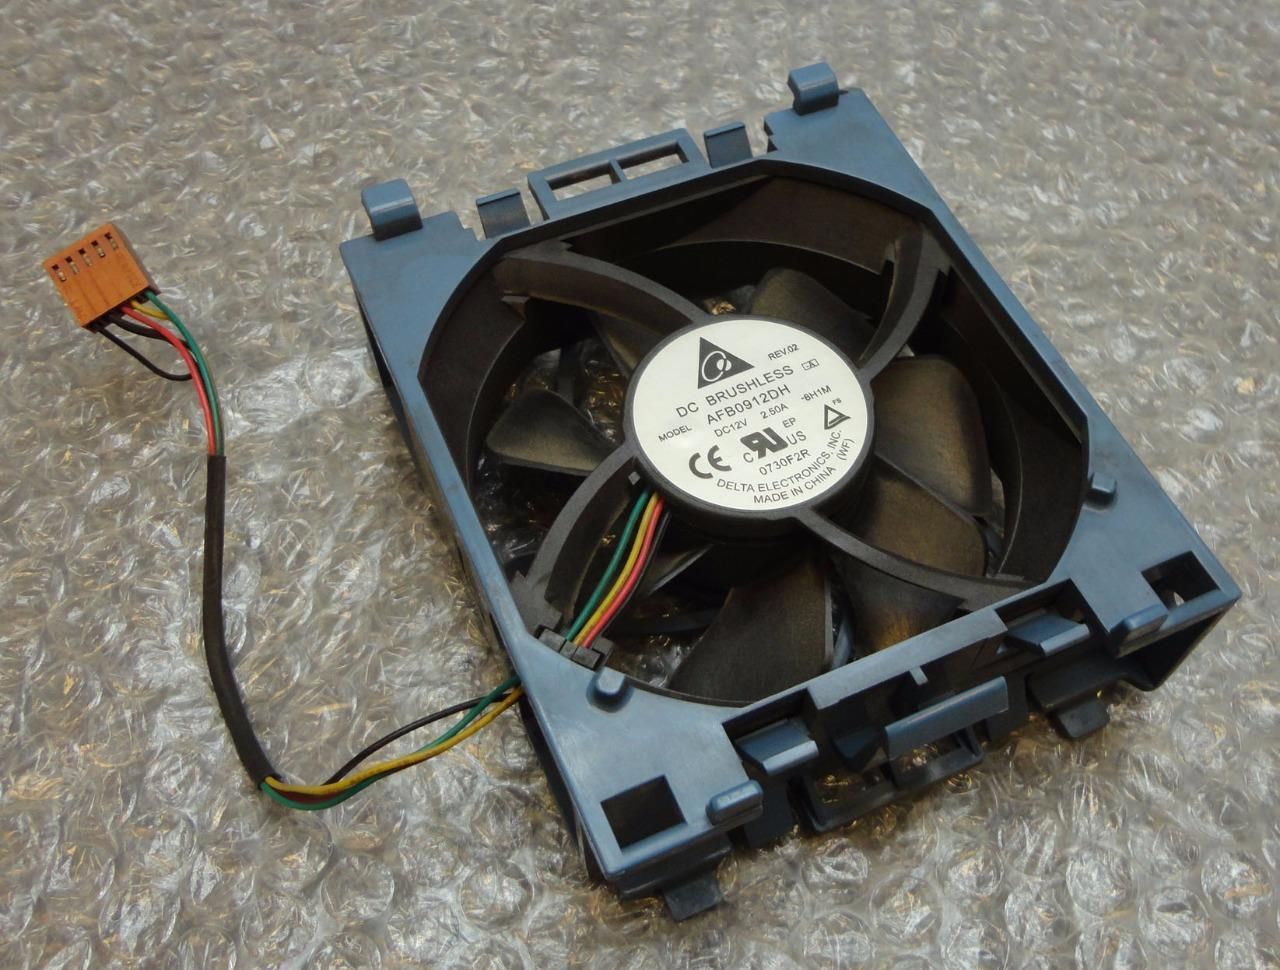 for HP 511774-001 ML350 G6 Server System Cooling Fan AFB0912DH 508110-001 